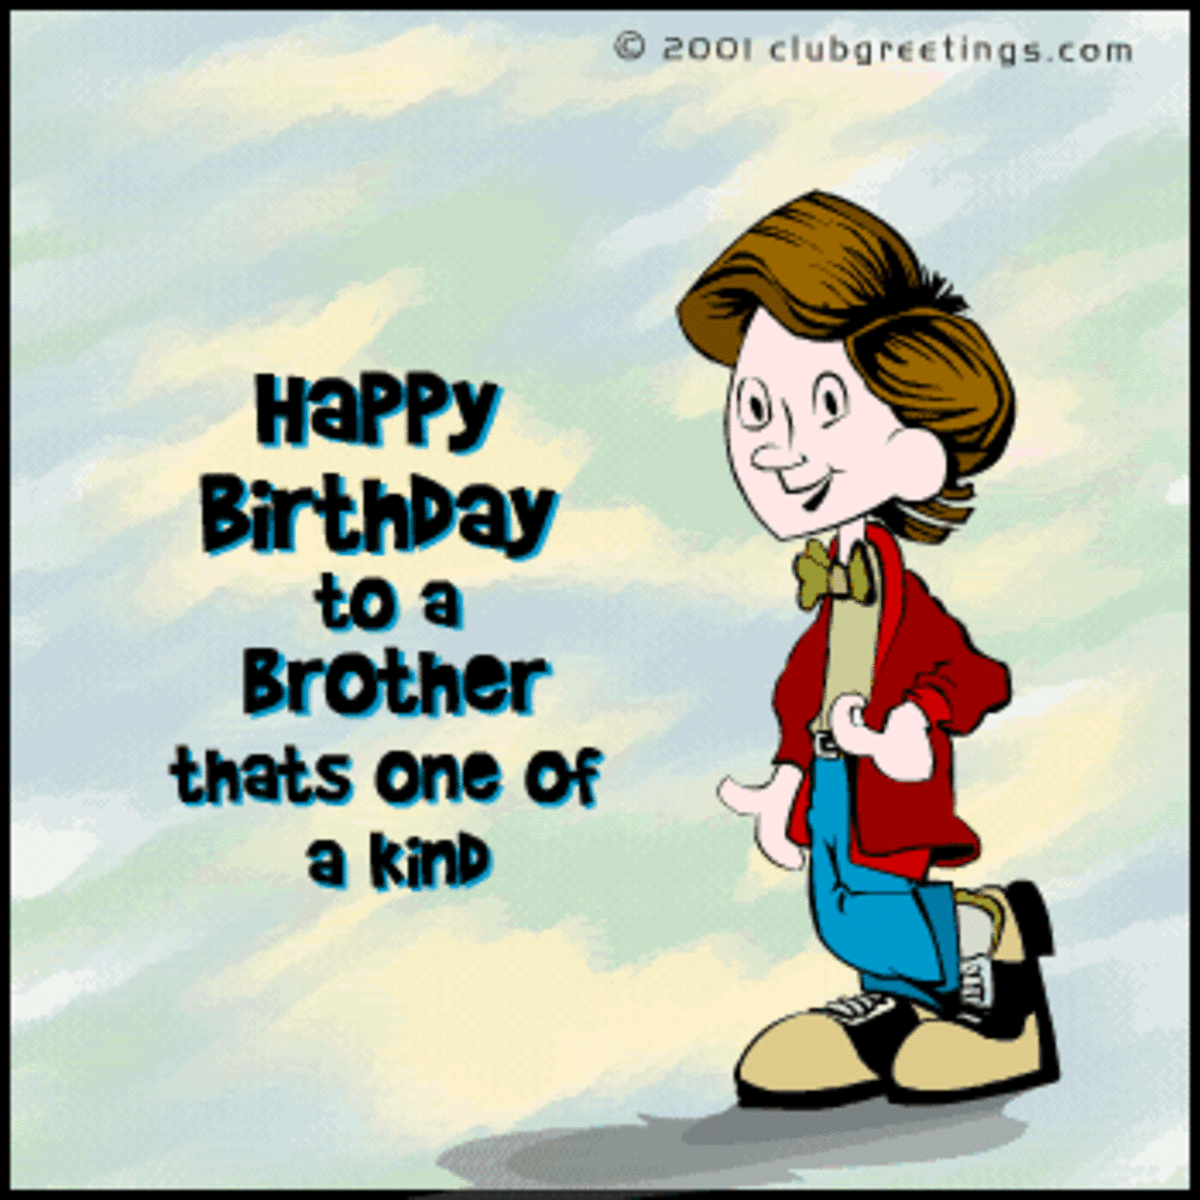 Birthday Wishes, Cards, and Quotes for Your Brother | HubPages